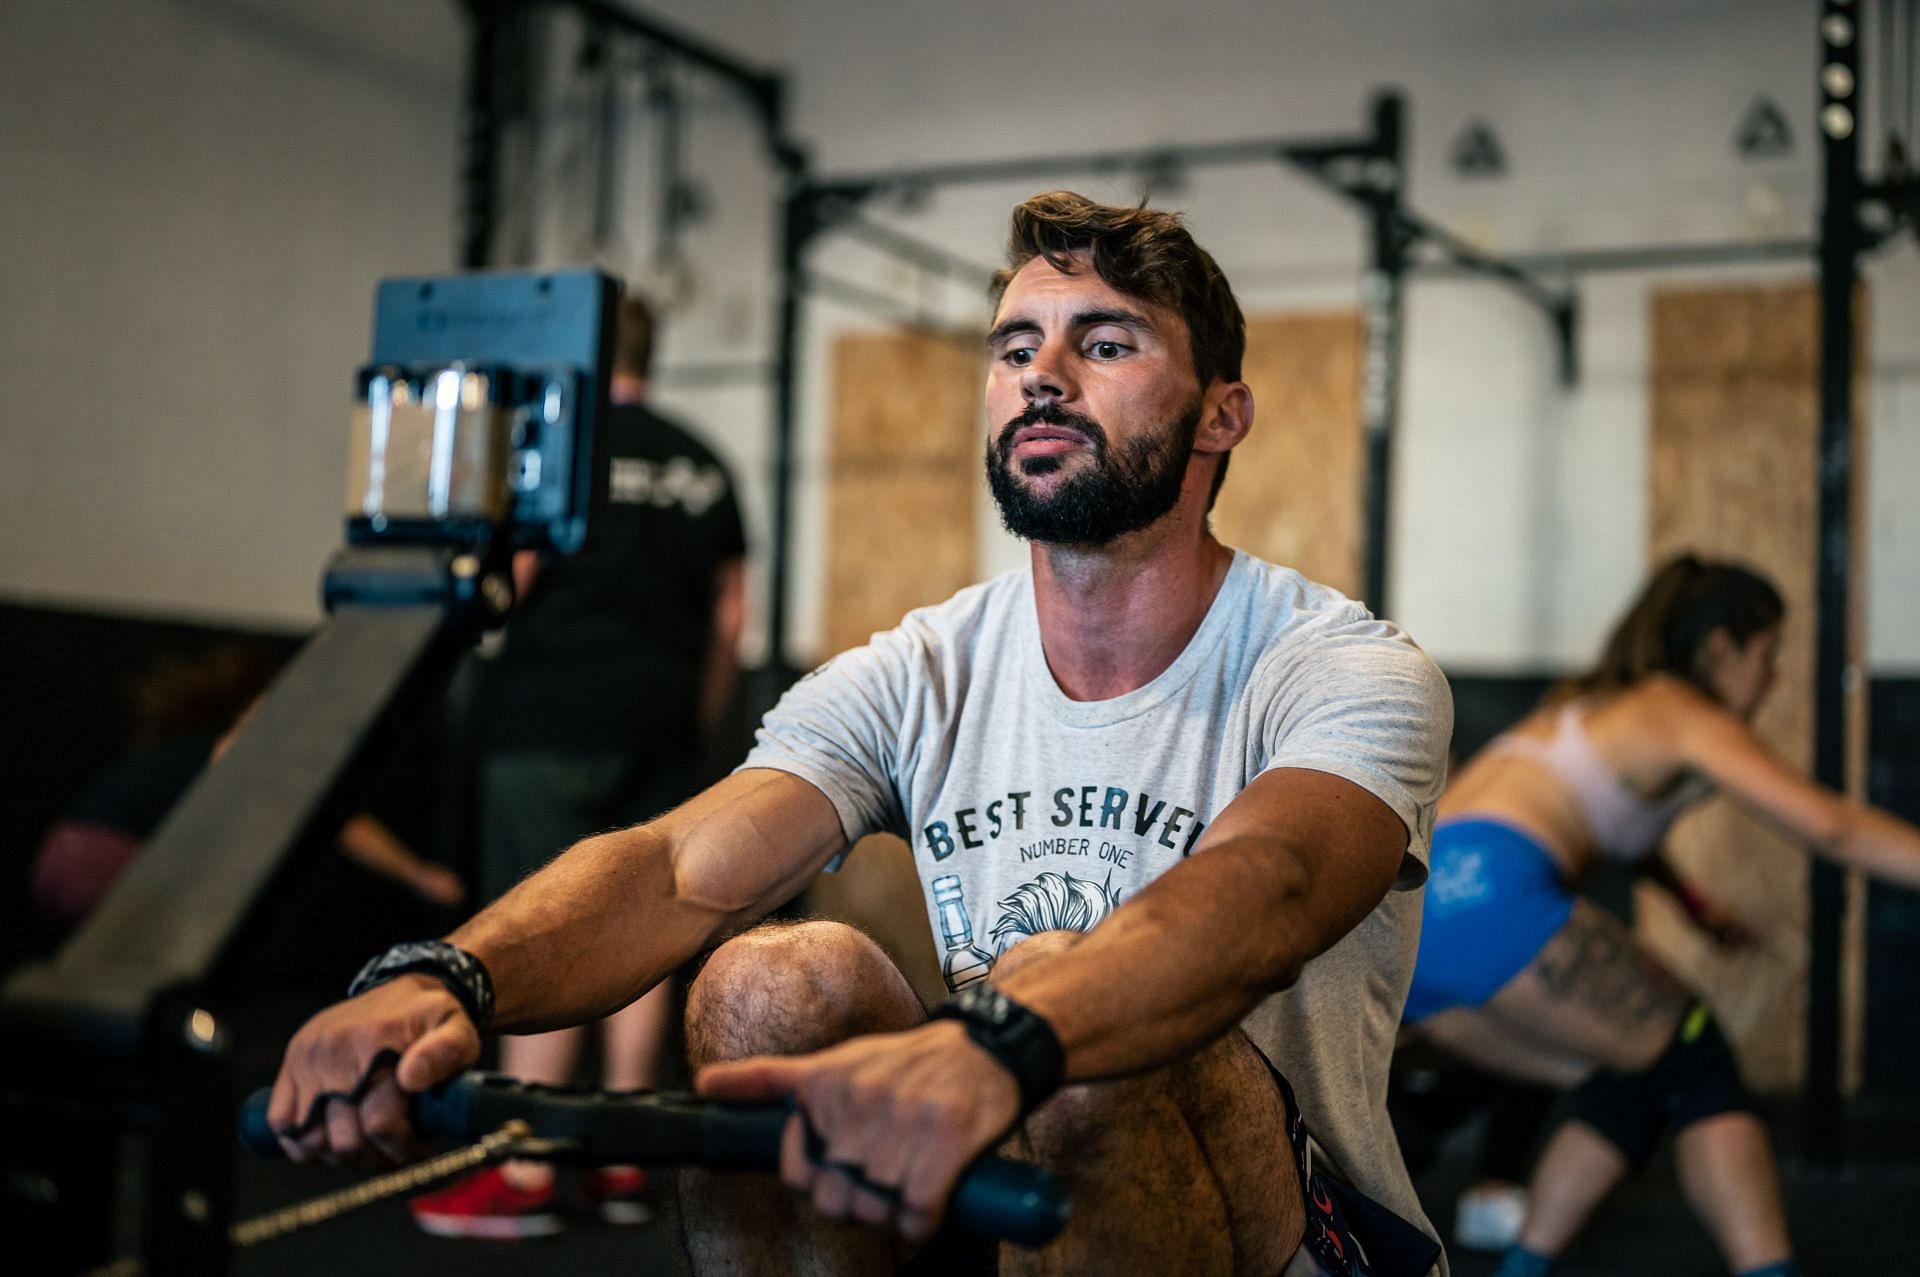 Here are the best rowing exercises for men to get a six-pack! (Image via unsplash/Bastien Plu)